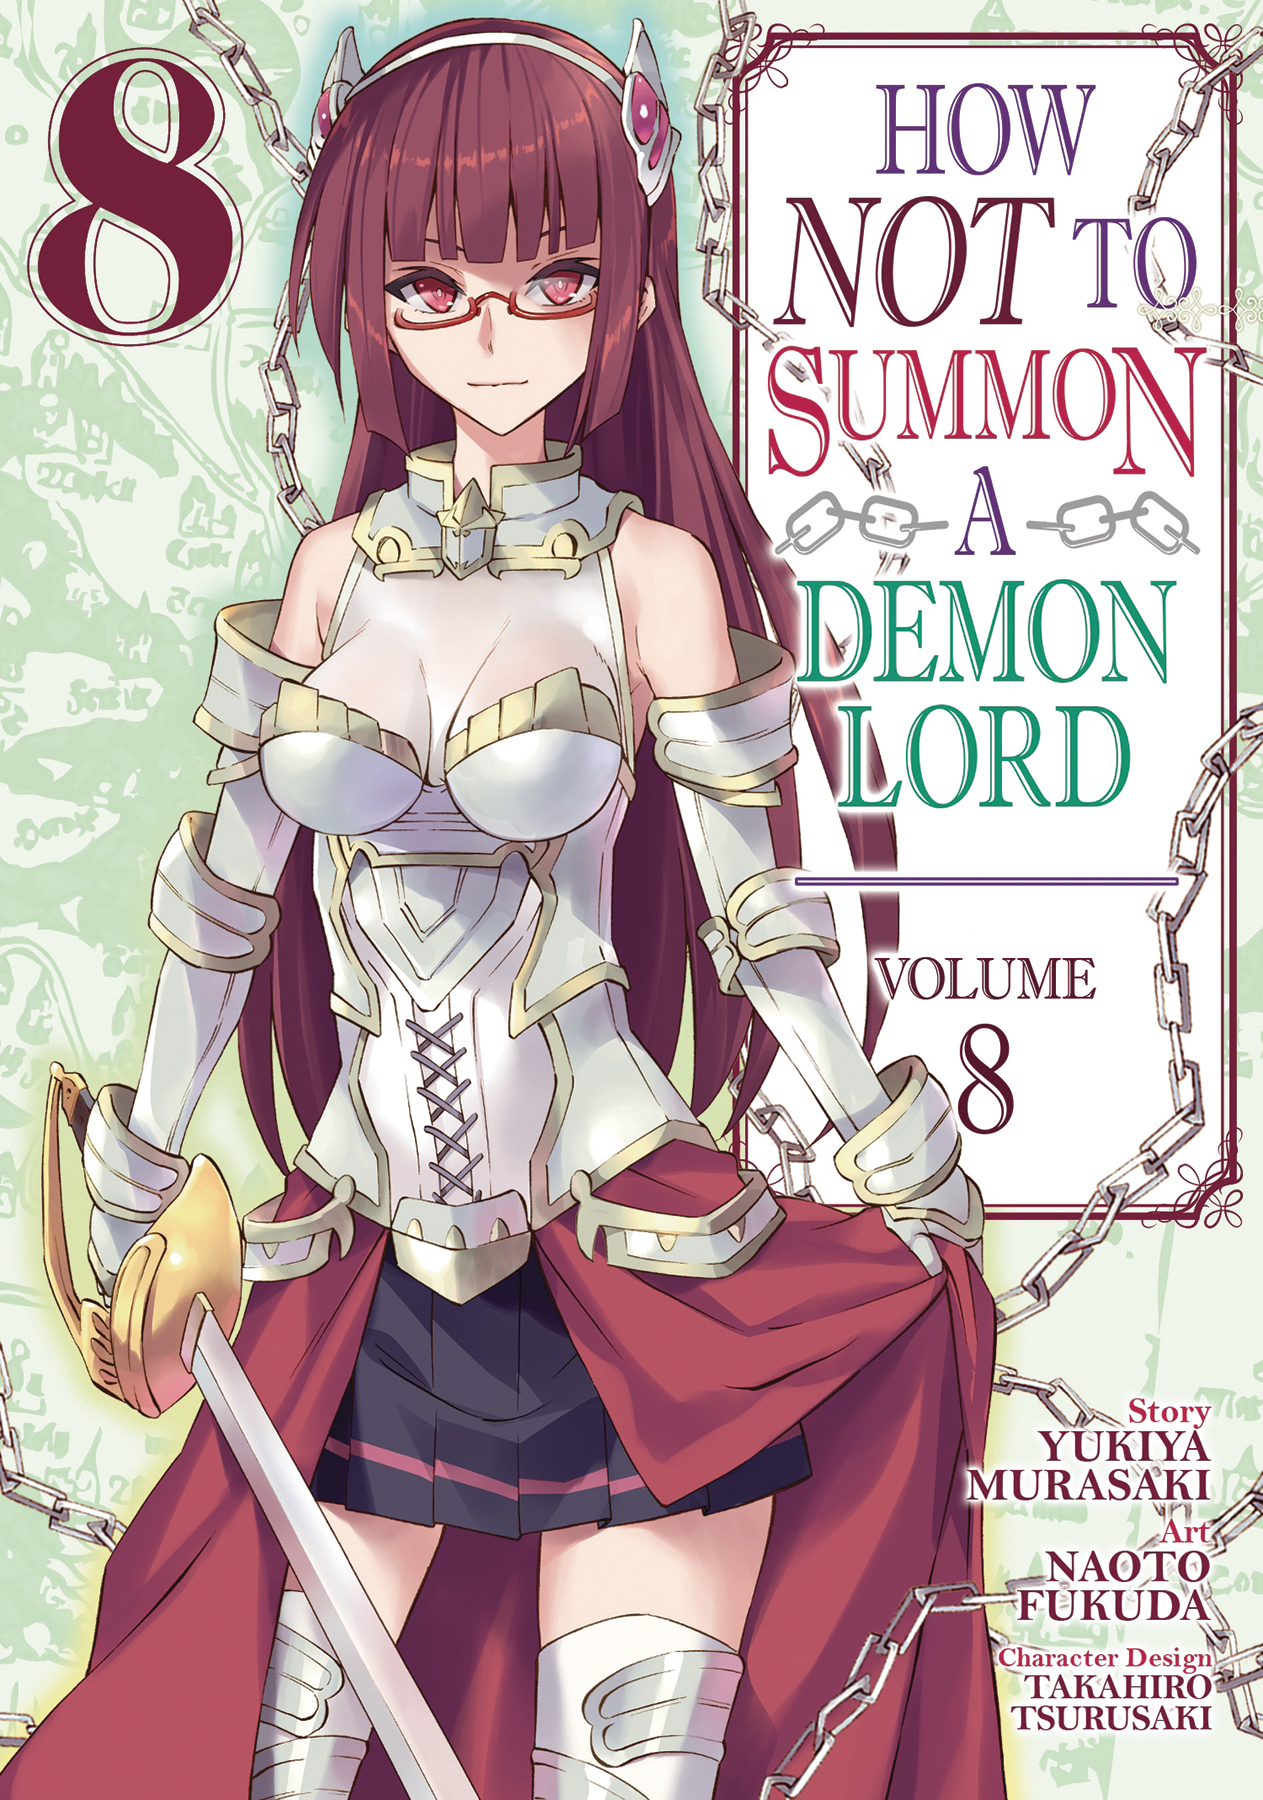 How not to Summon a Demon Lord Manga Volume 8 (Mature)